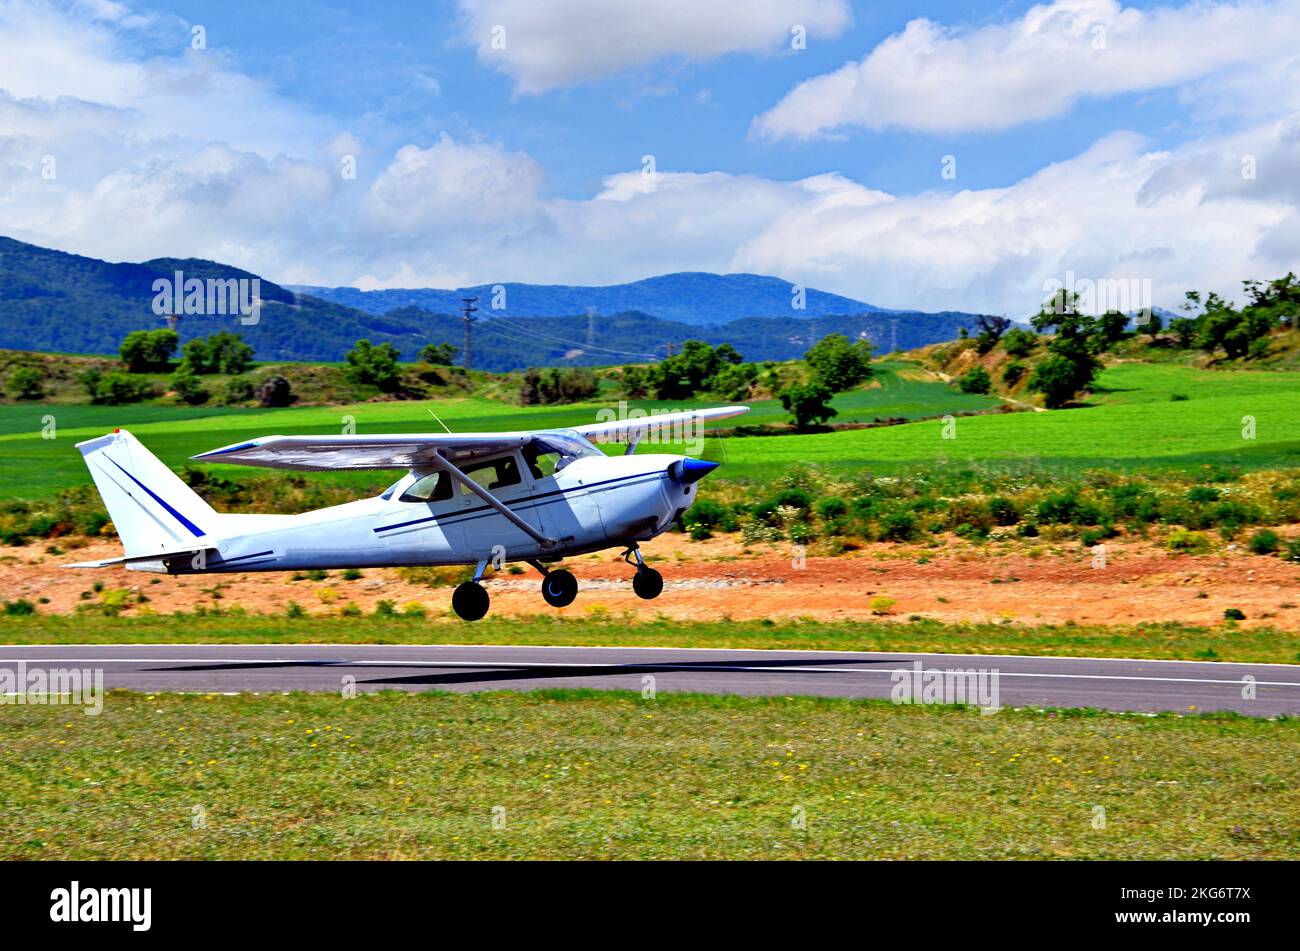 Single engine ultralight airplane taking off from airfield under blue sky with white clouds Stock Photo